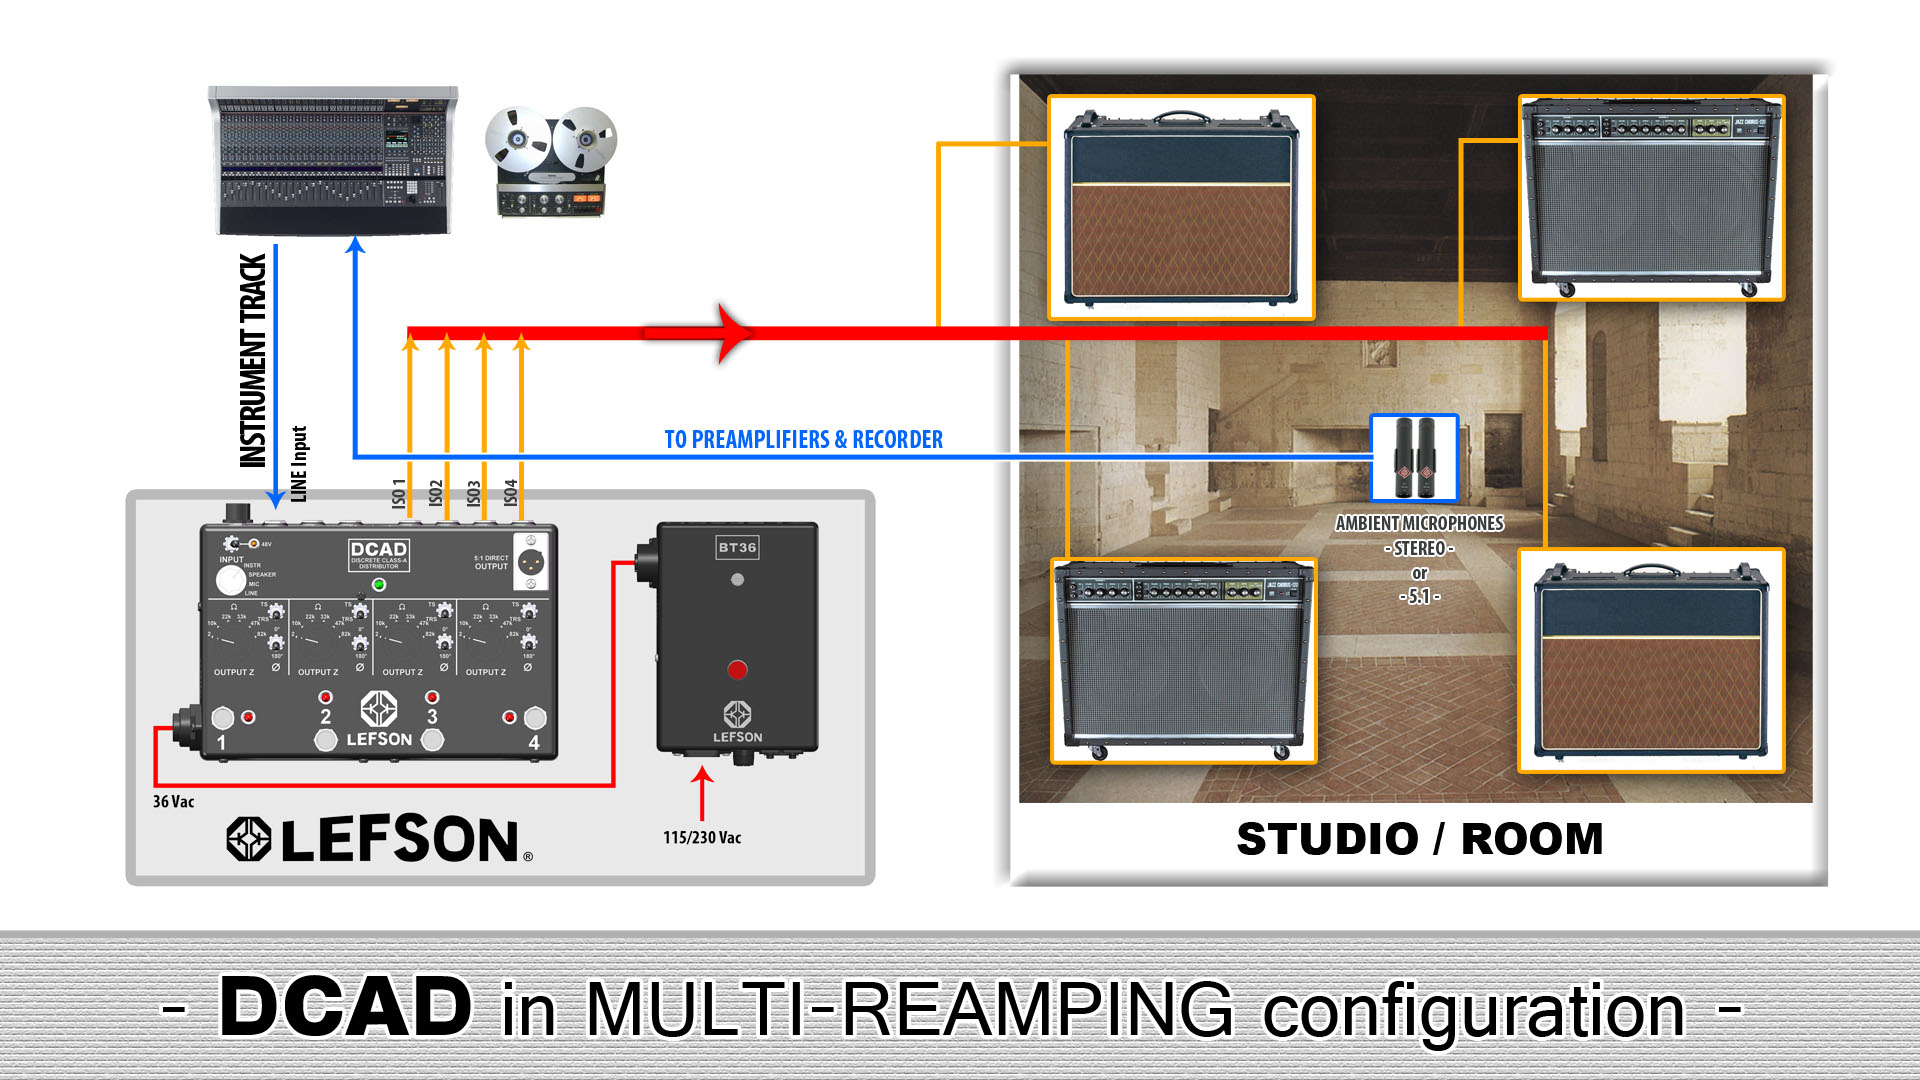 Picture of multi-reamping with the DCAD